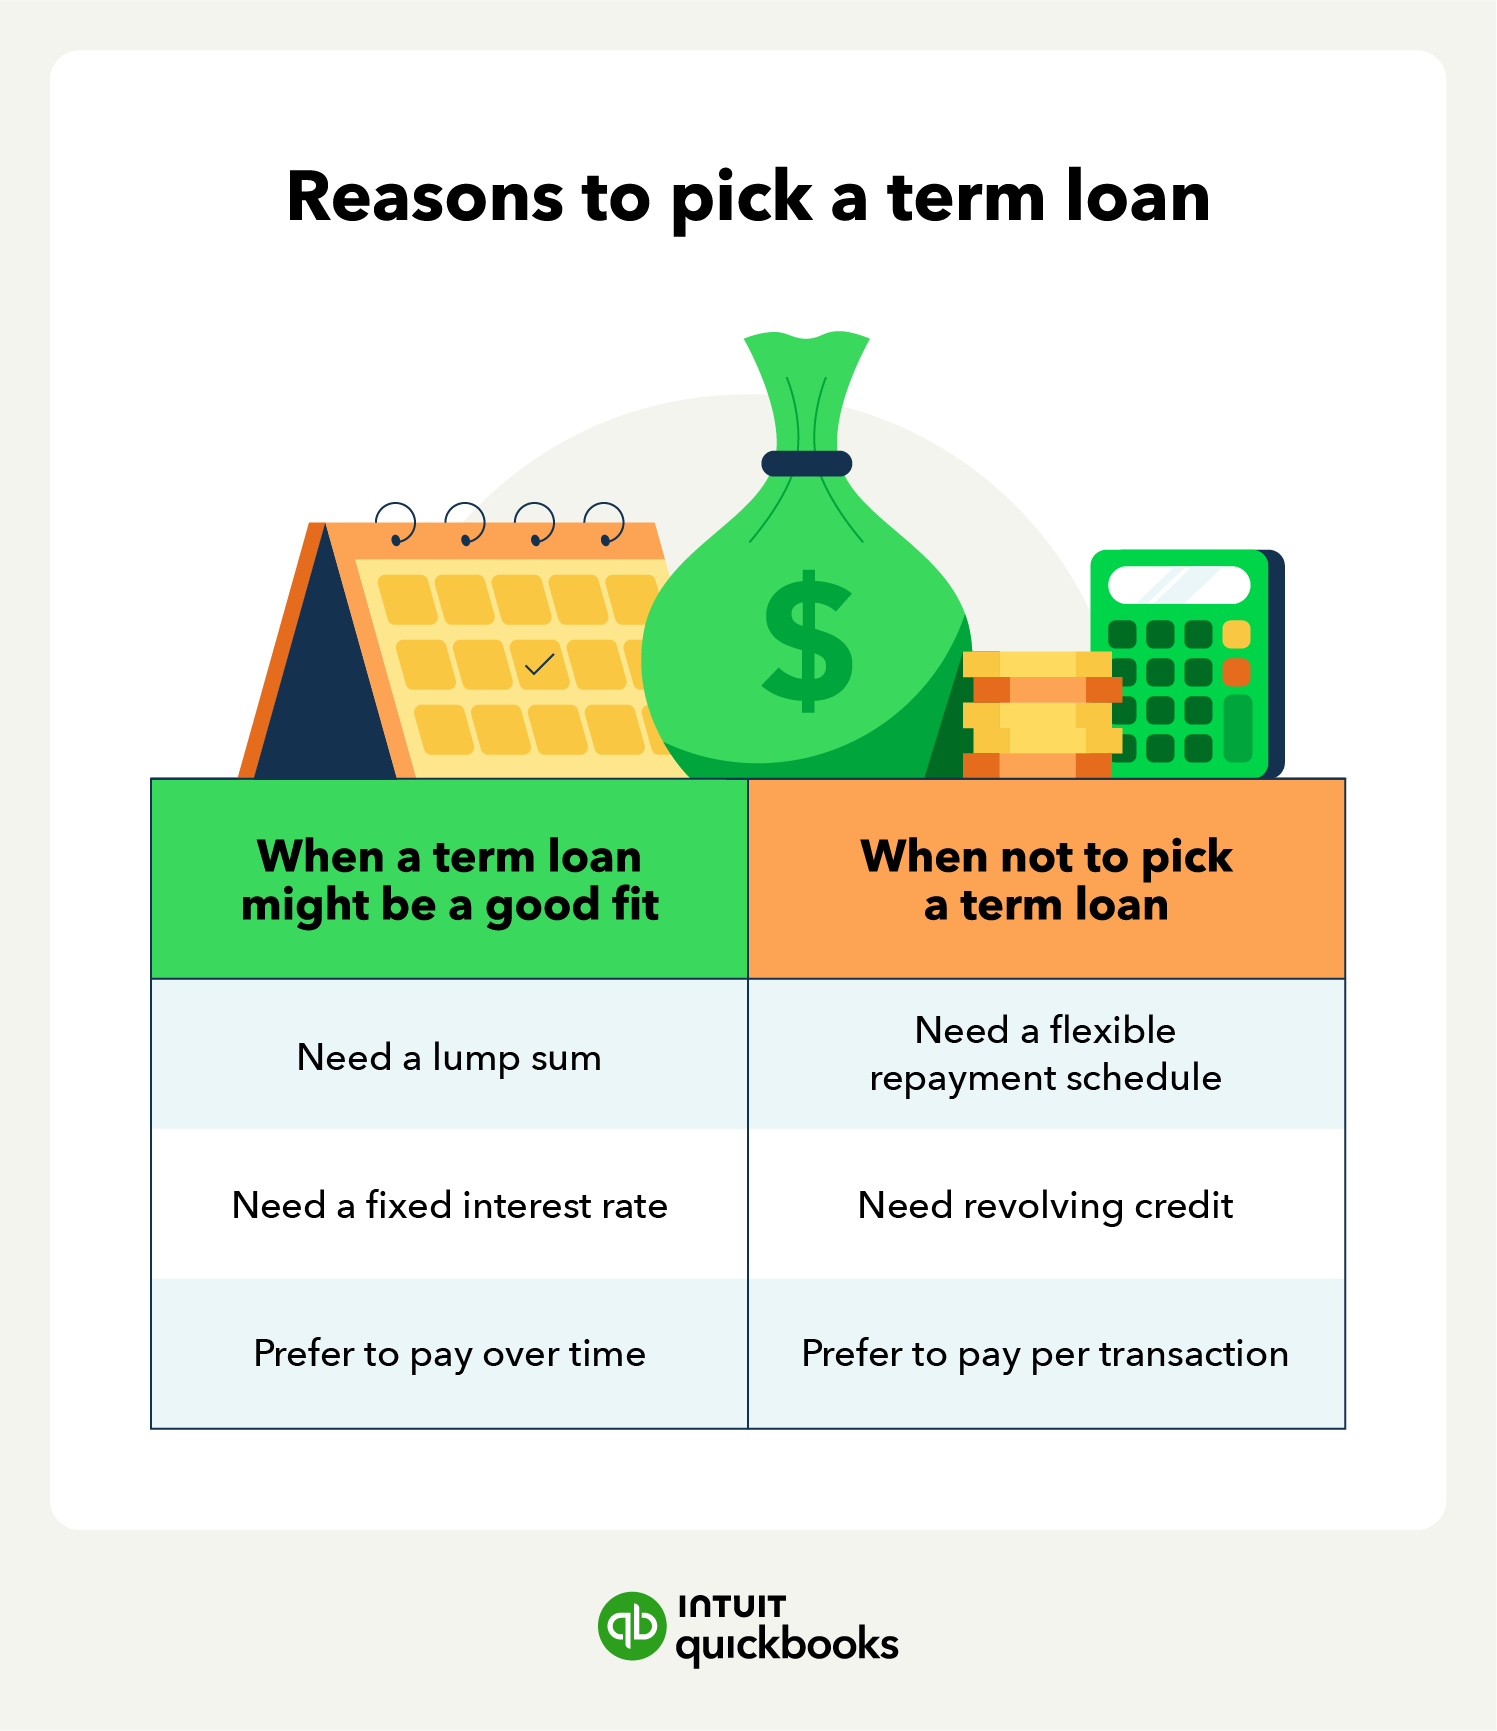 An illustration of the reasons to pick a term loan, such as set payments and fixed interest rate.